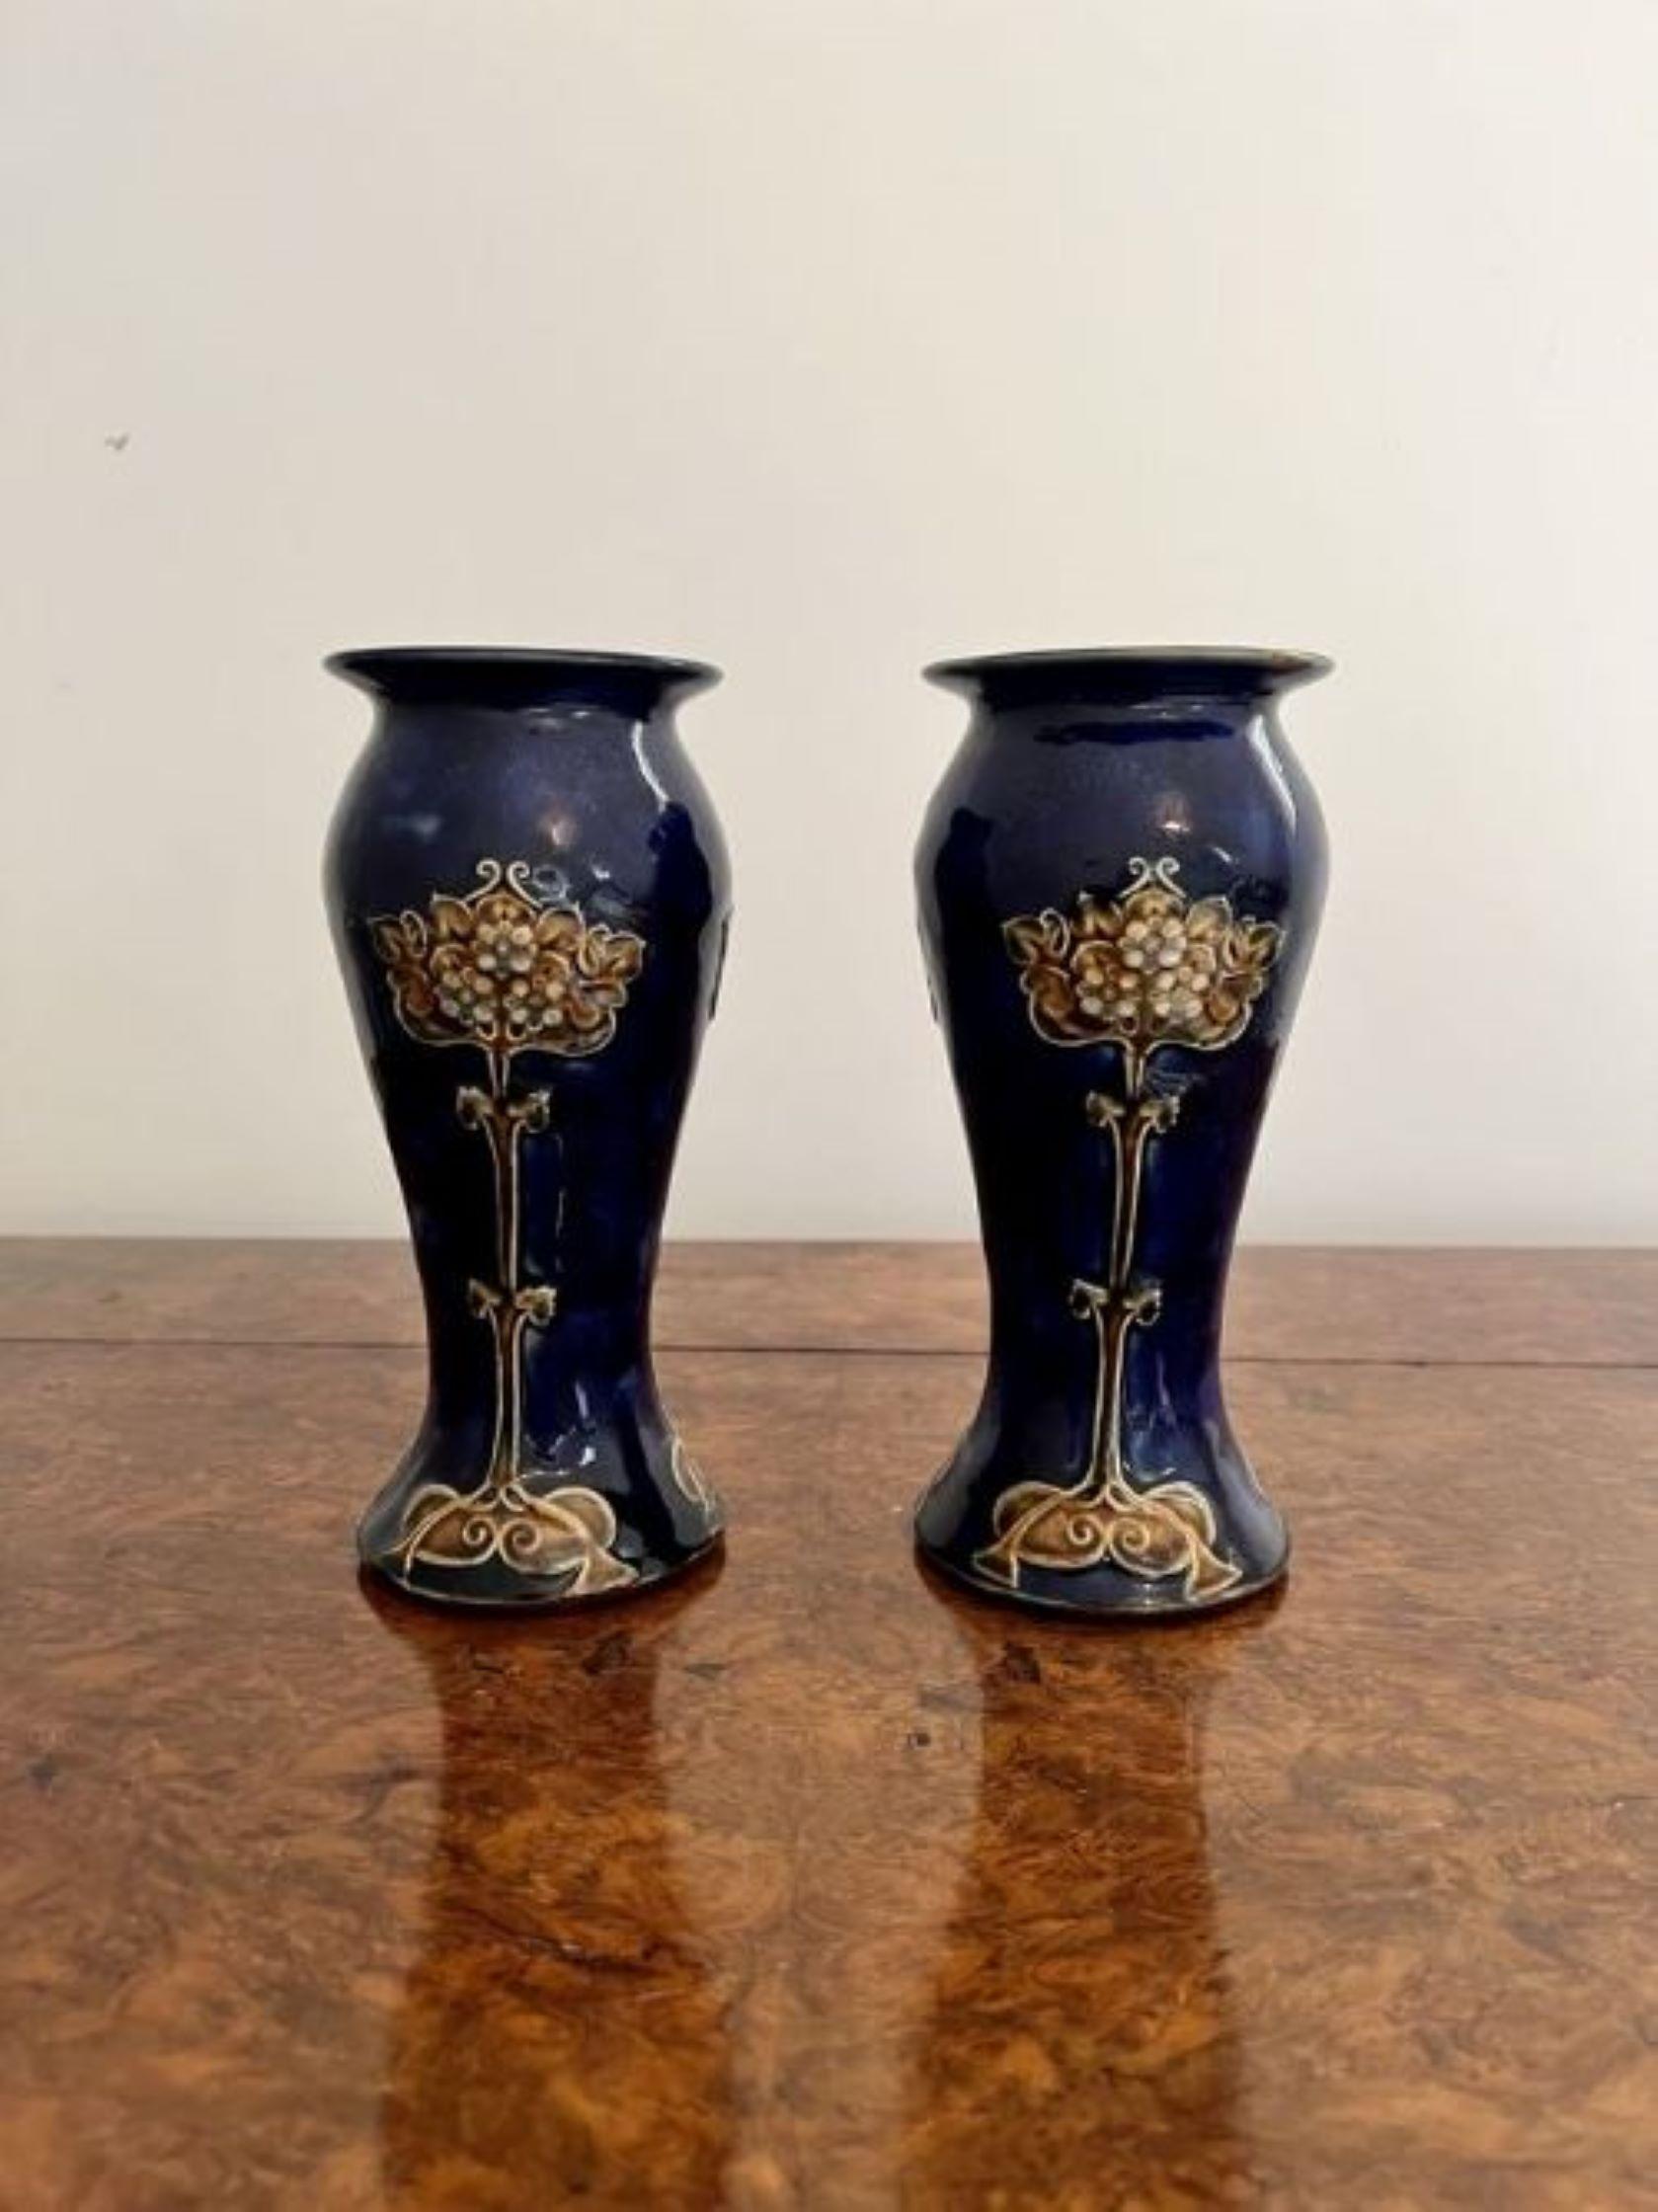 Quality pair of antique Royal Doulton Art Nouveau vases having a quality pair of antique Royal Doulton Art Nouveau vases, having a shaped body with a blue ground decorated with brown flowers stemming from the bottom of the vase with circular green